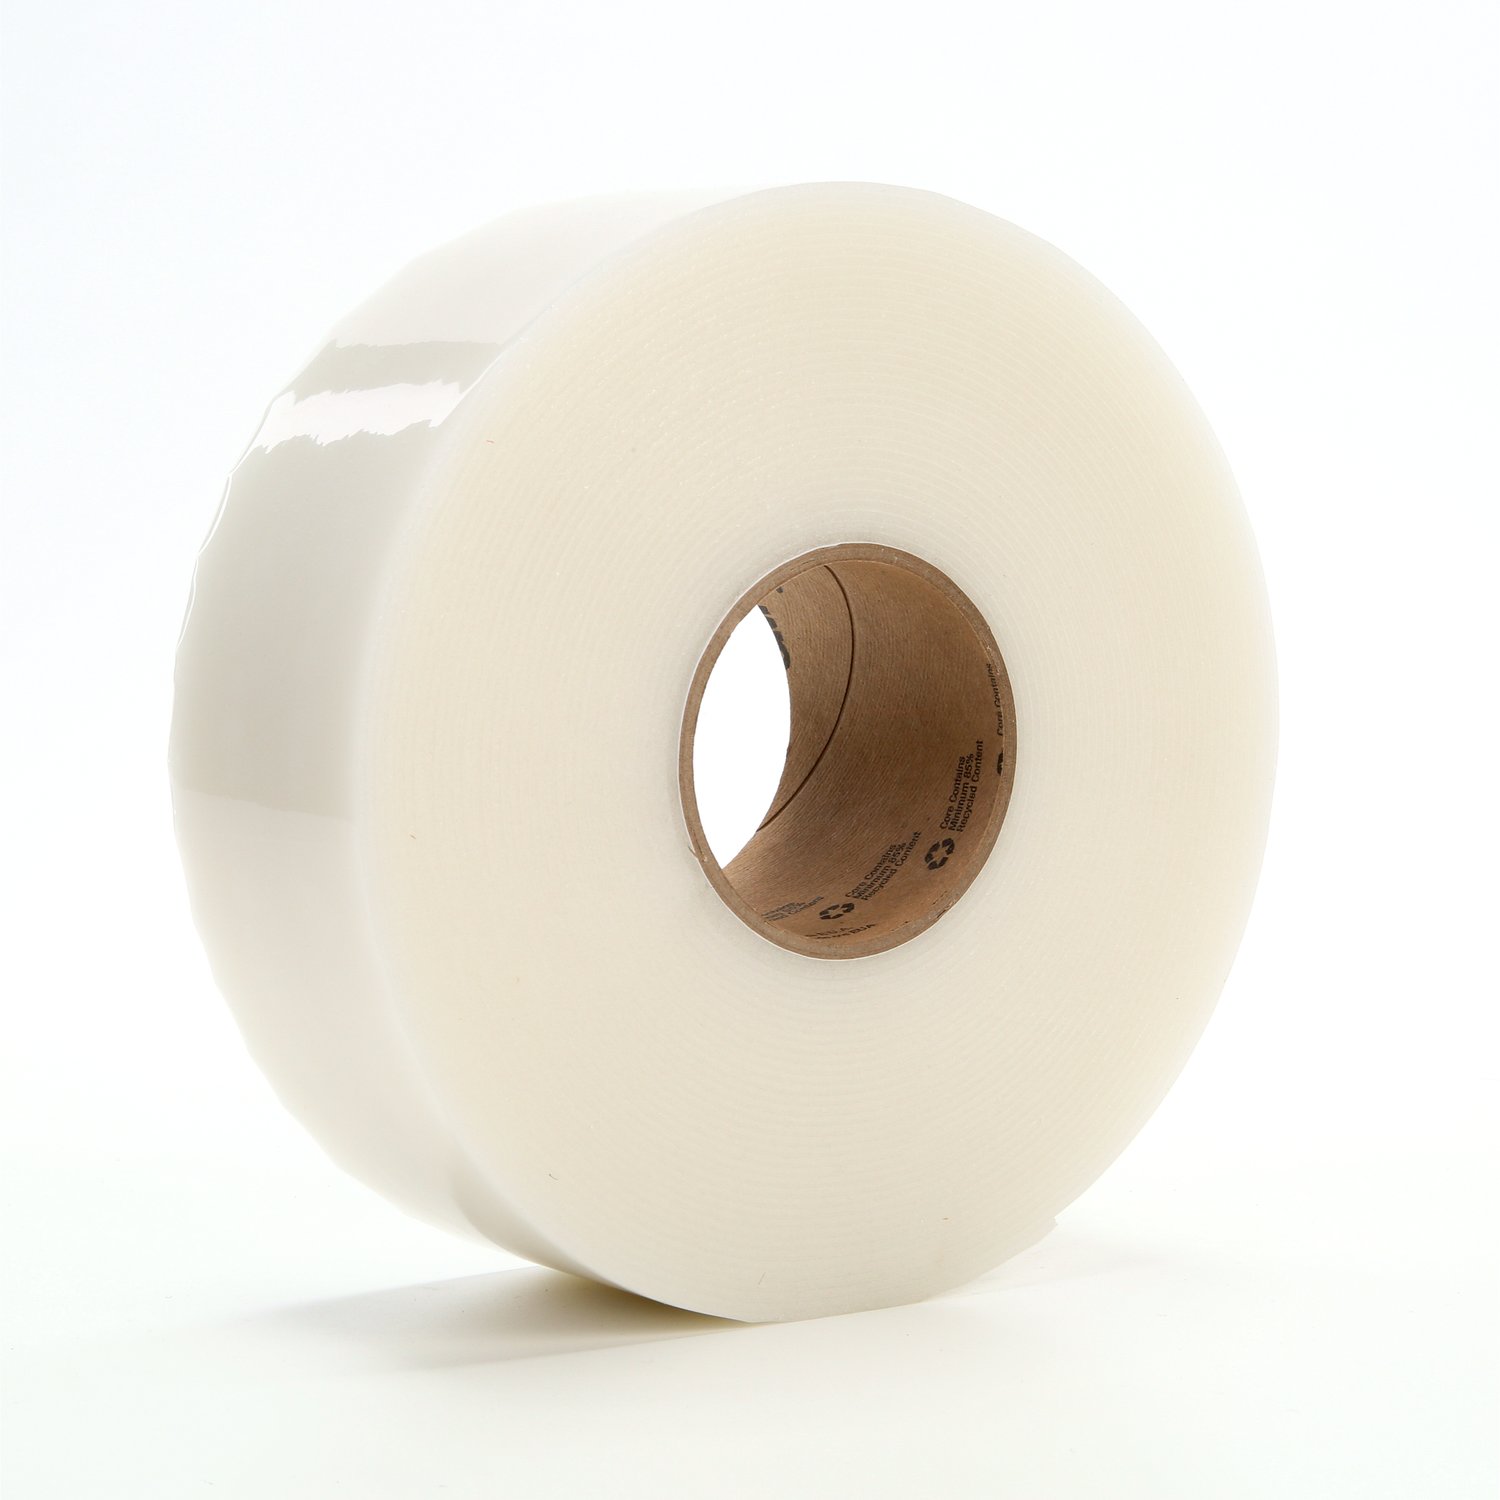 7100002405 - 3M Extreme Sealing Tape 4412N, Translucent, 3 in x 18 yd, 80 mil, 3
rolls per case